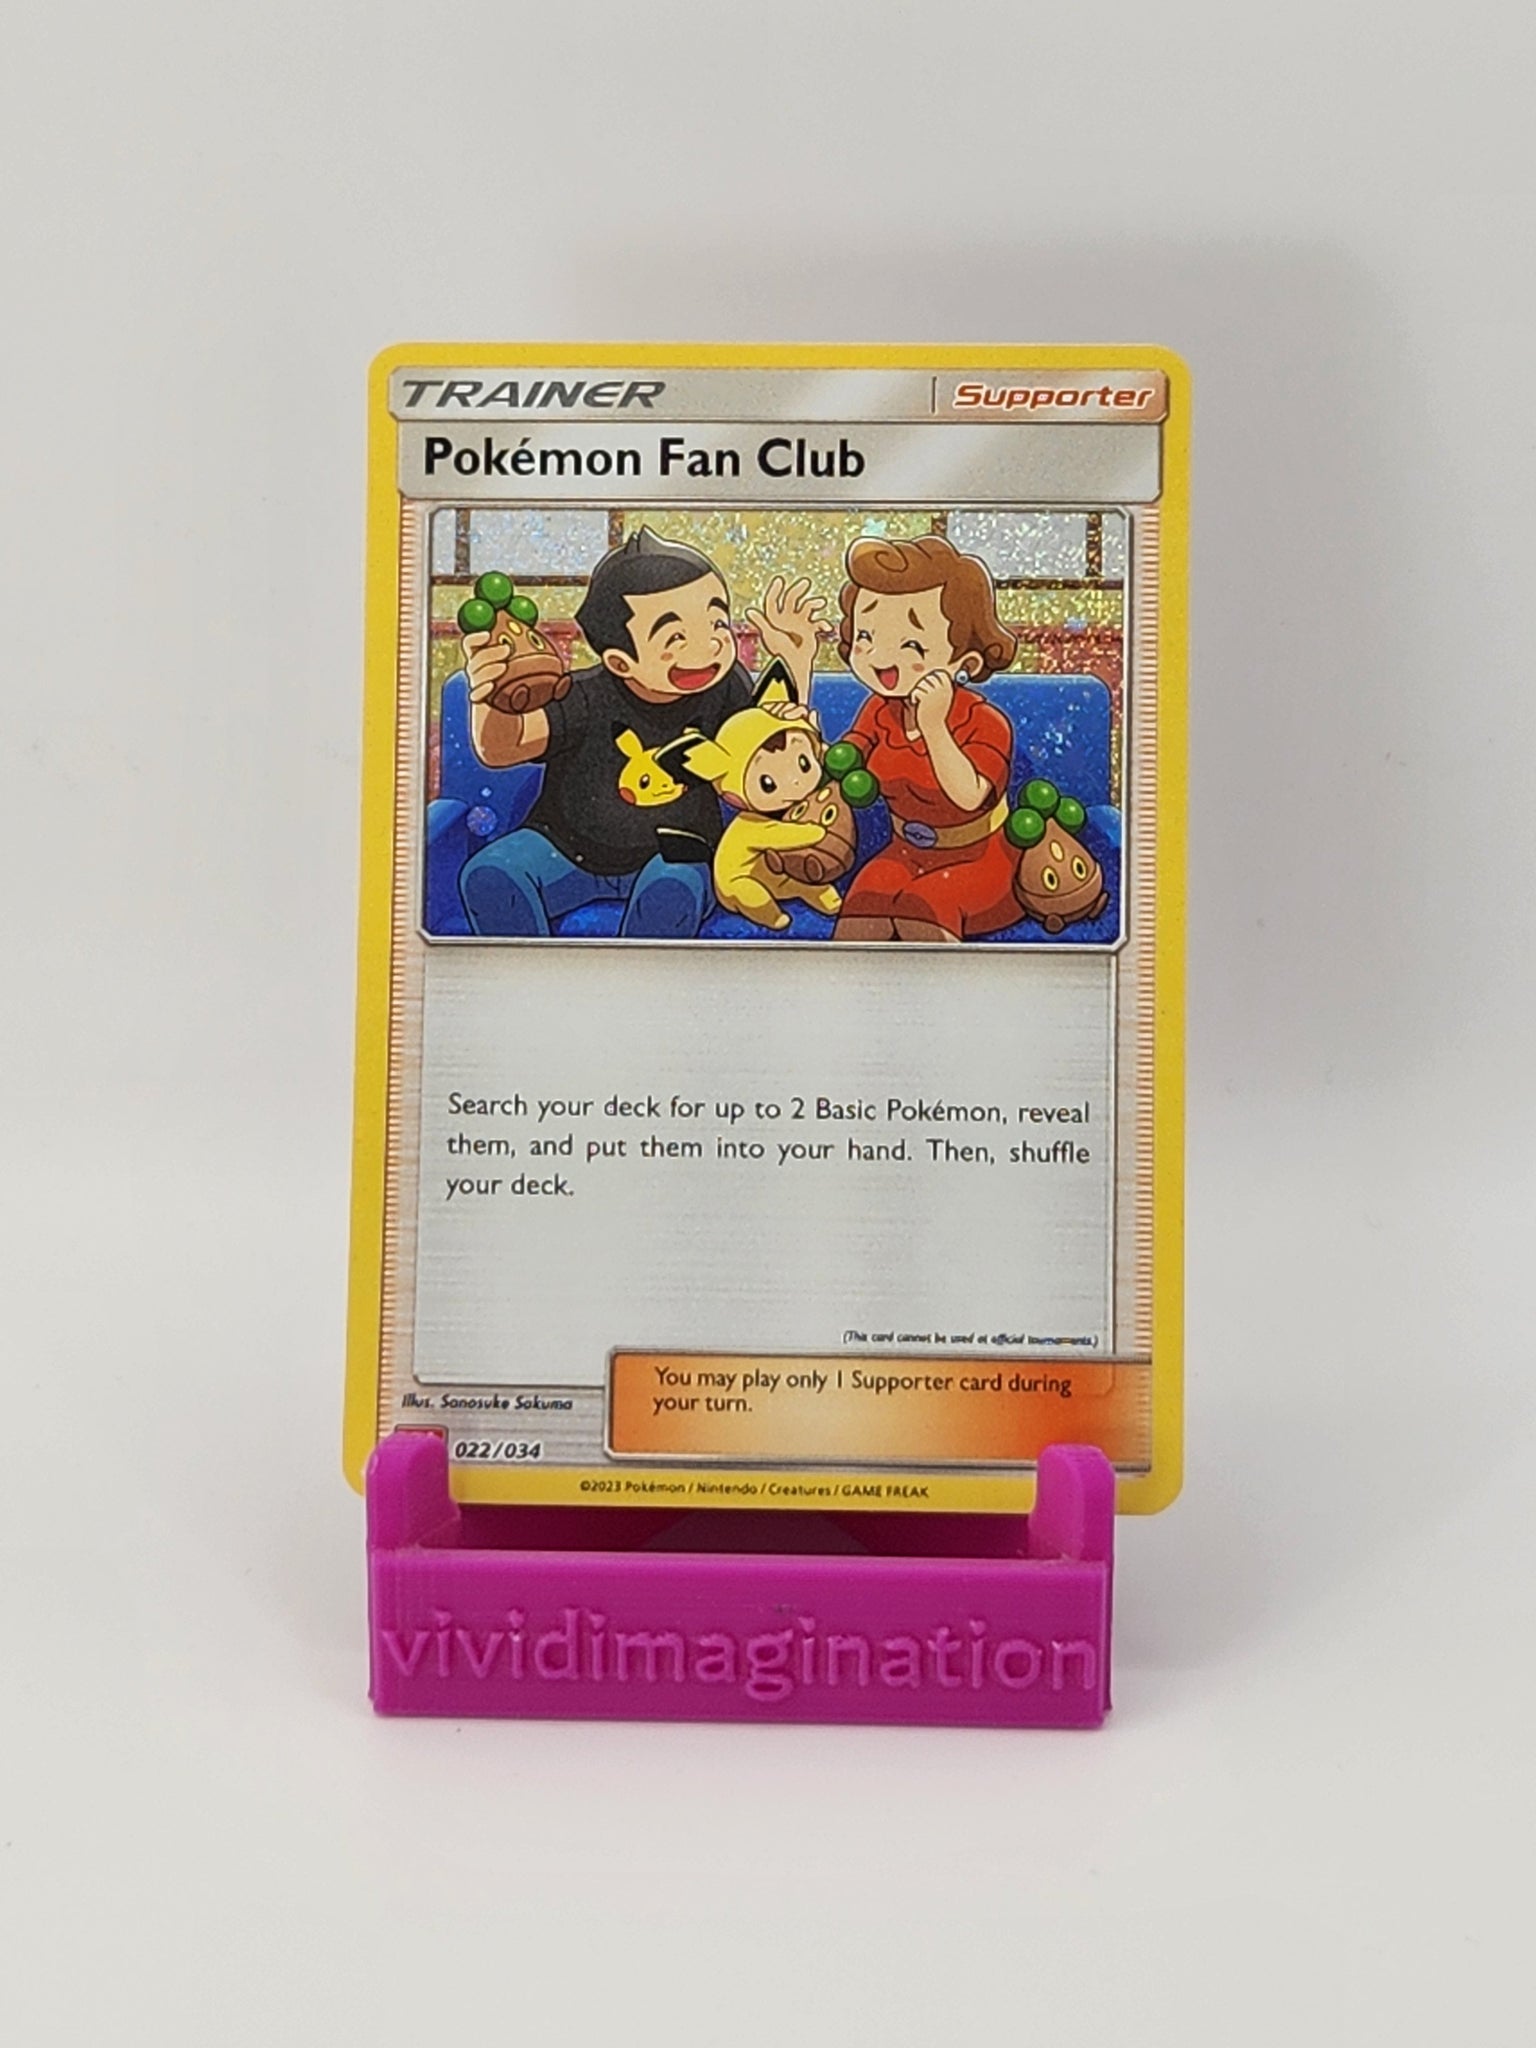 Pokemon Fan Club 022/034 - All the best items from Vivid Imagination Cards and Collectibles - Just $1.15! Shop now at Vivid Imagination Cards and Collectibles